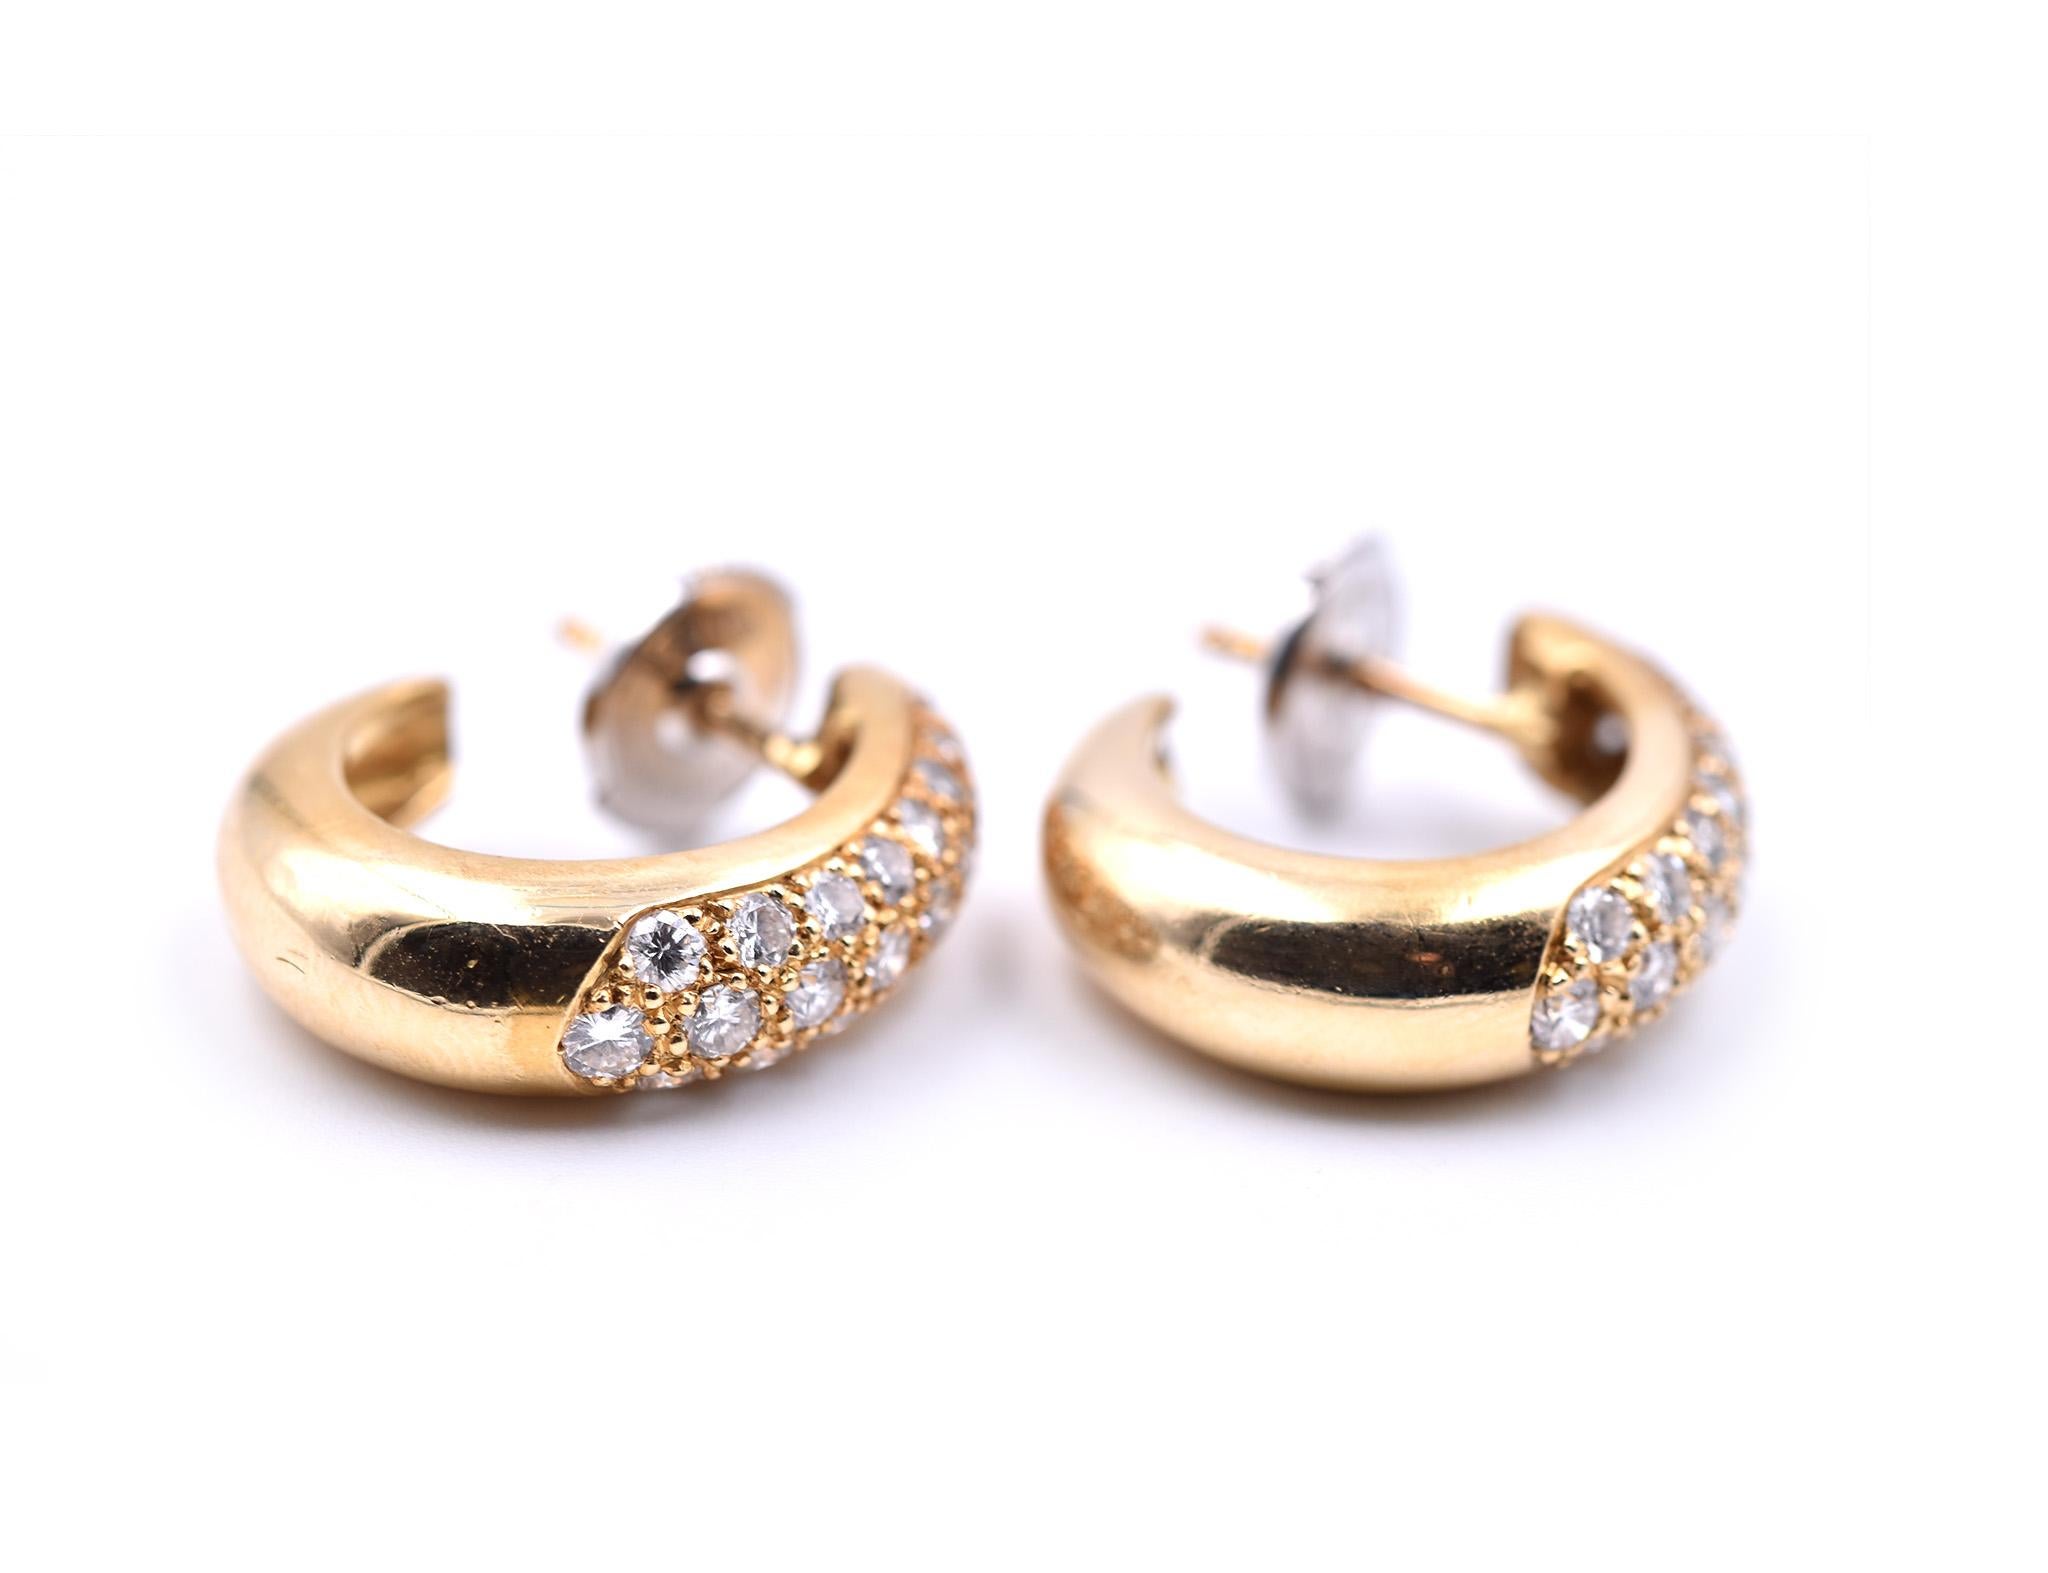 Designer: custom design
Material: 18k yellow gold
Diamonds: 50 round brilliant = 1.10cttw
Color: G
Clarity: VS
Dimensions: earrings are approximately 19.73mm by 5.72mm
Fastenings: post with LaPousette
Weight: 8.01 grams
